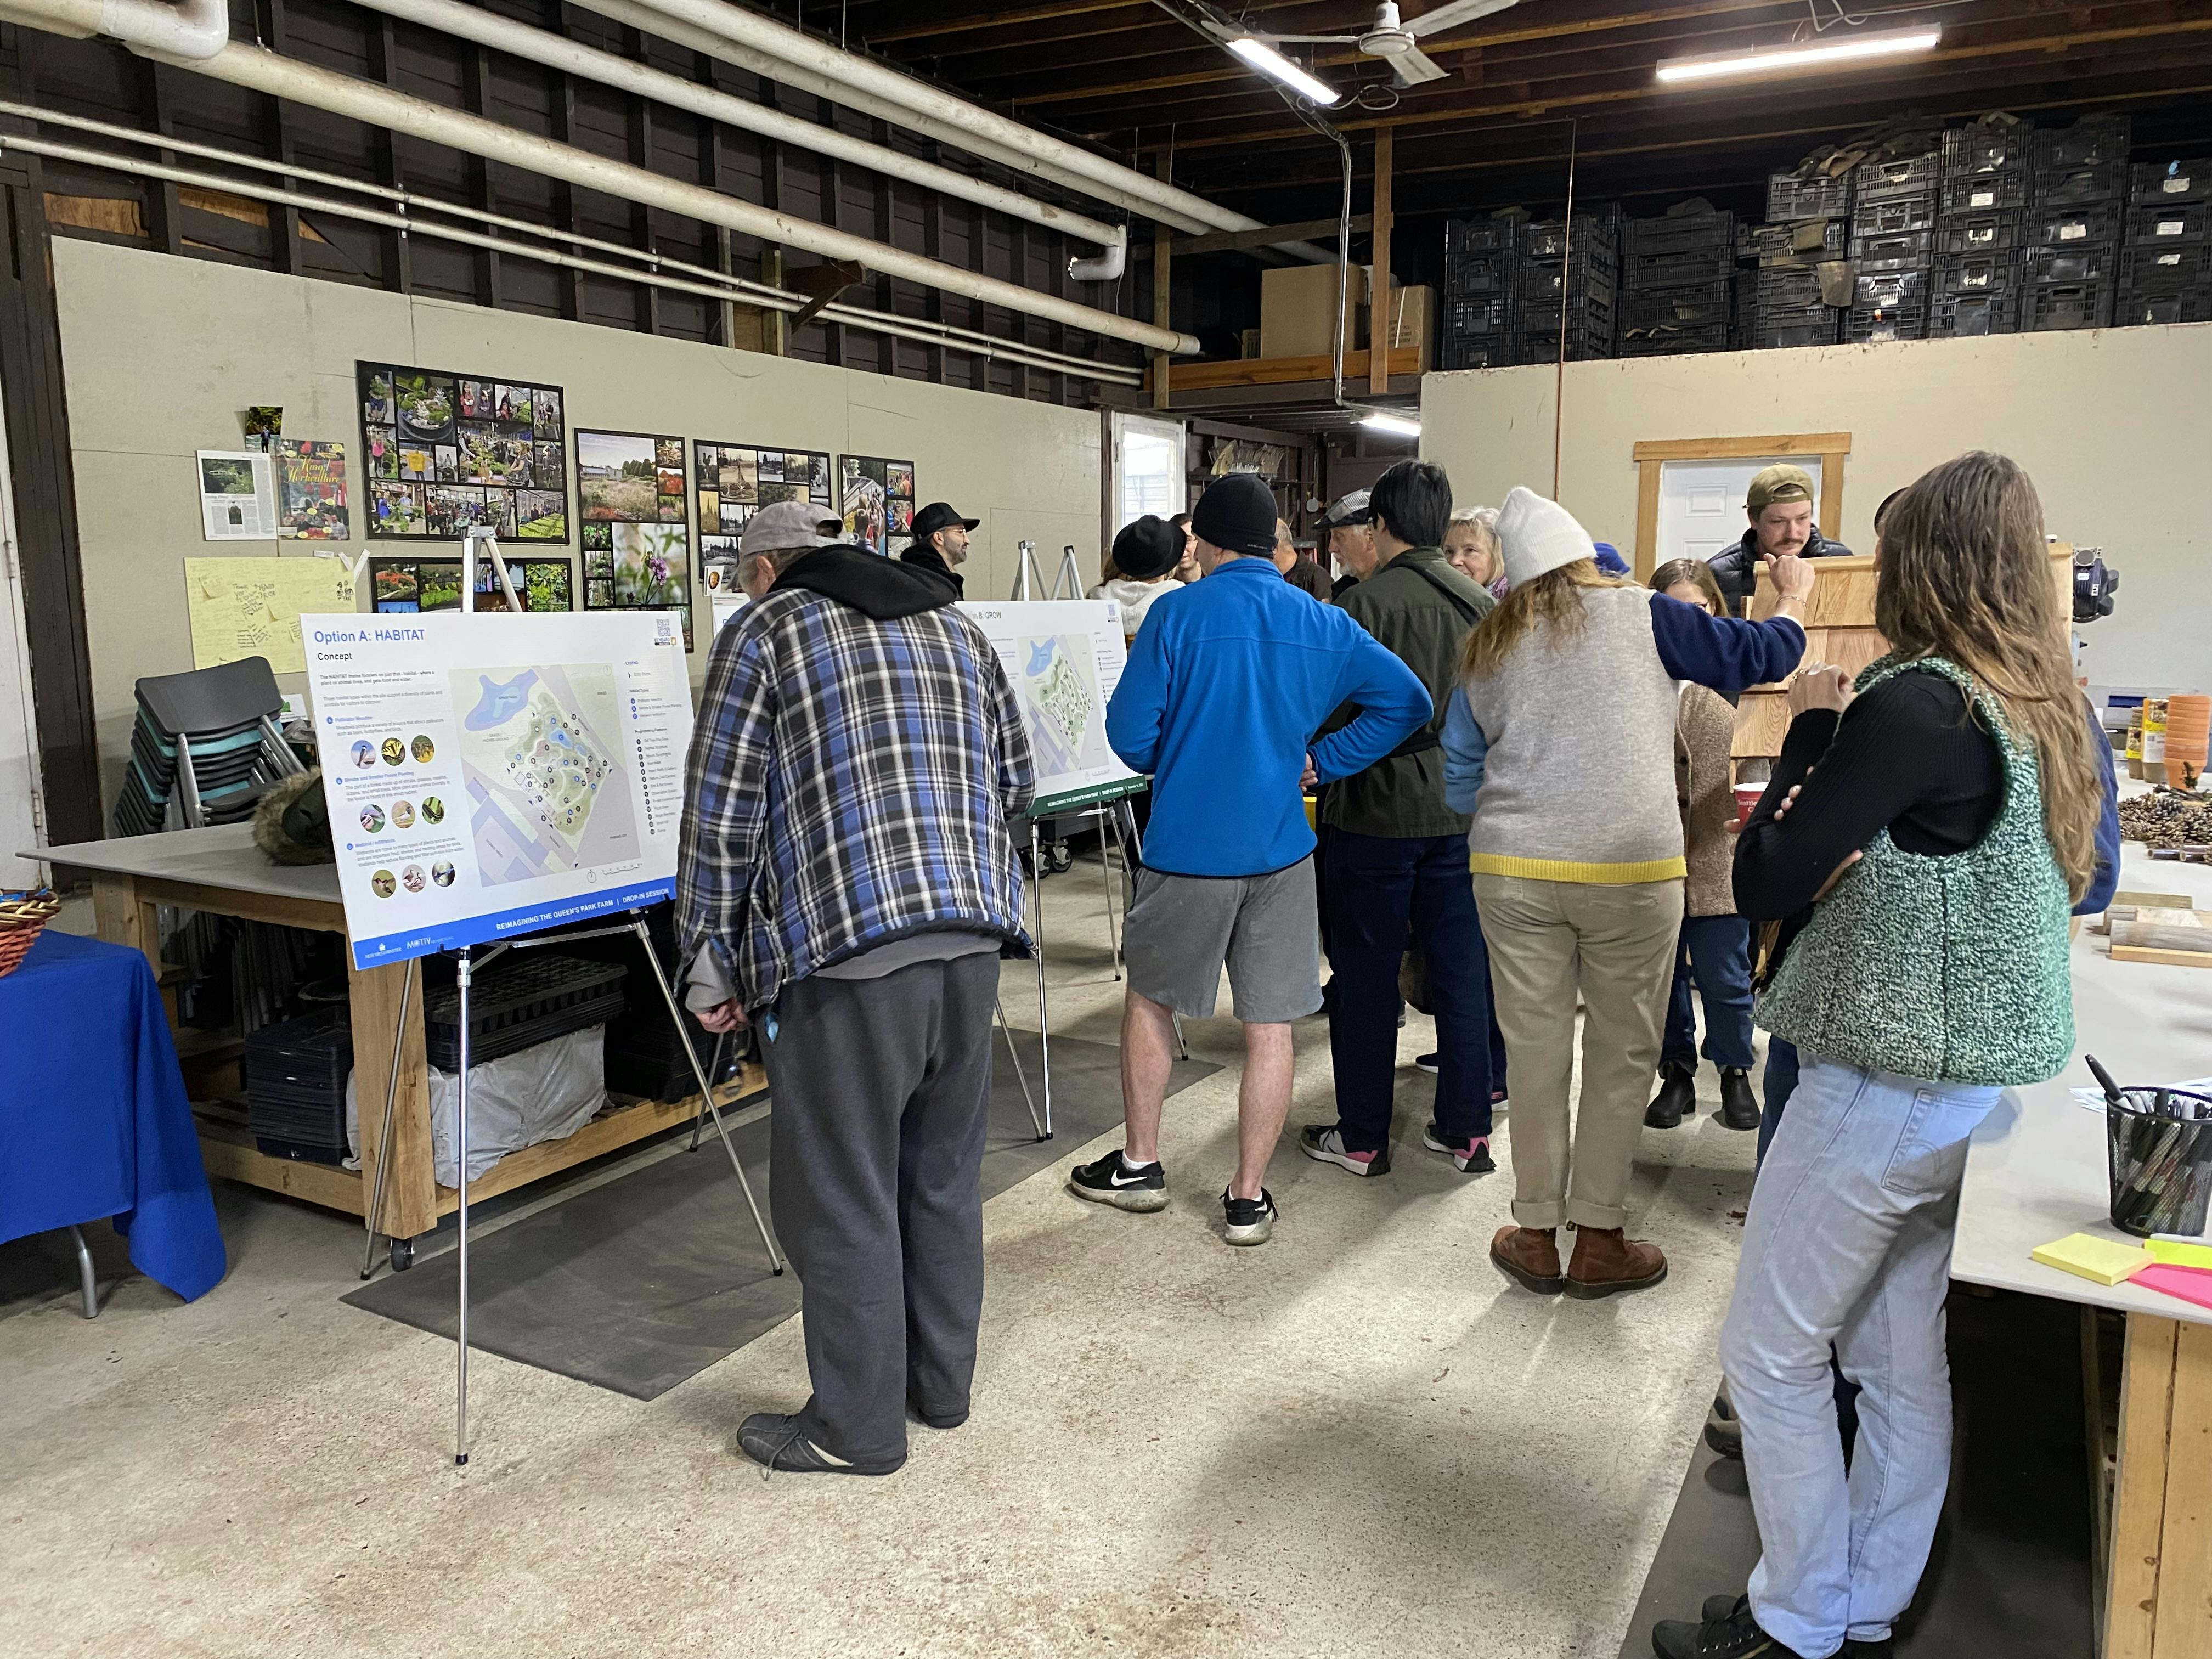 Participants read information and help build an insect hotel at the Nov. 19 drop-in engagement at the Queen's Park Greenhouse